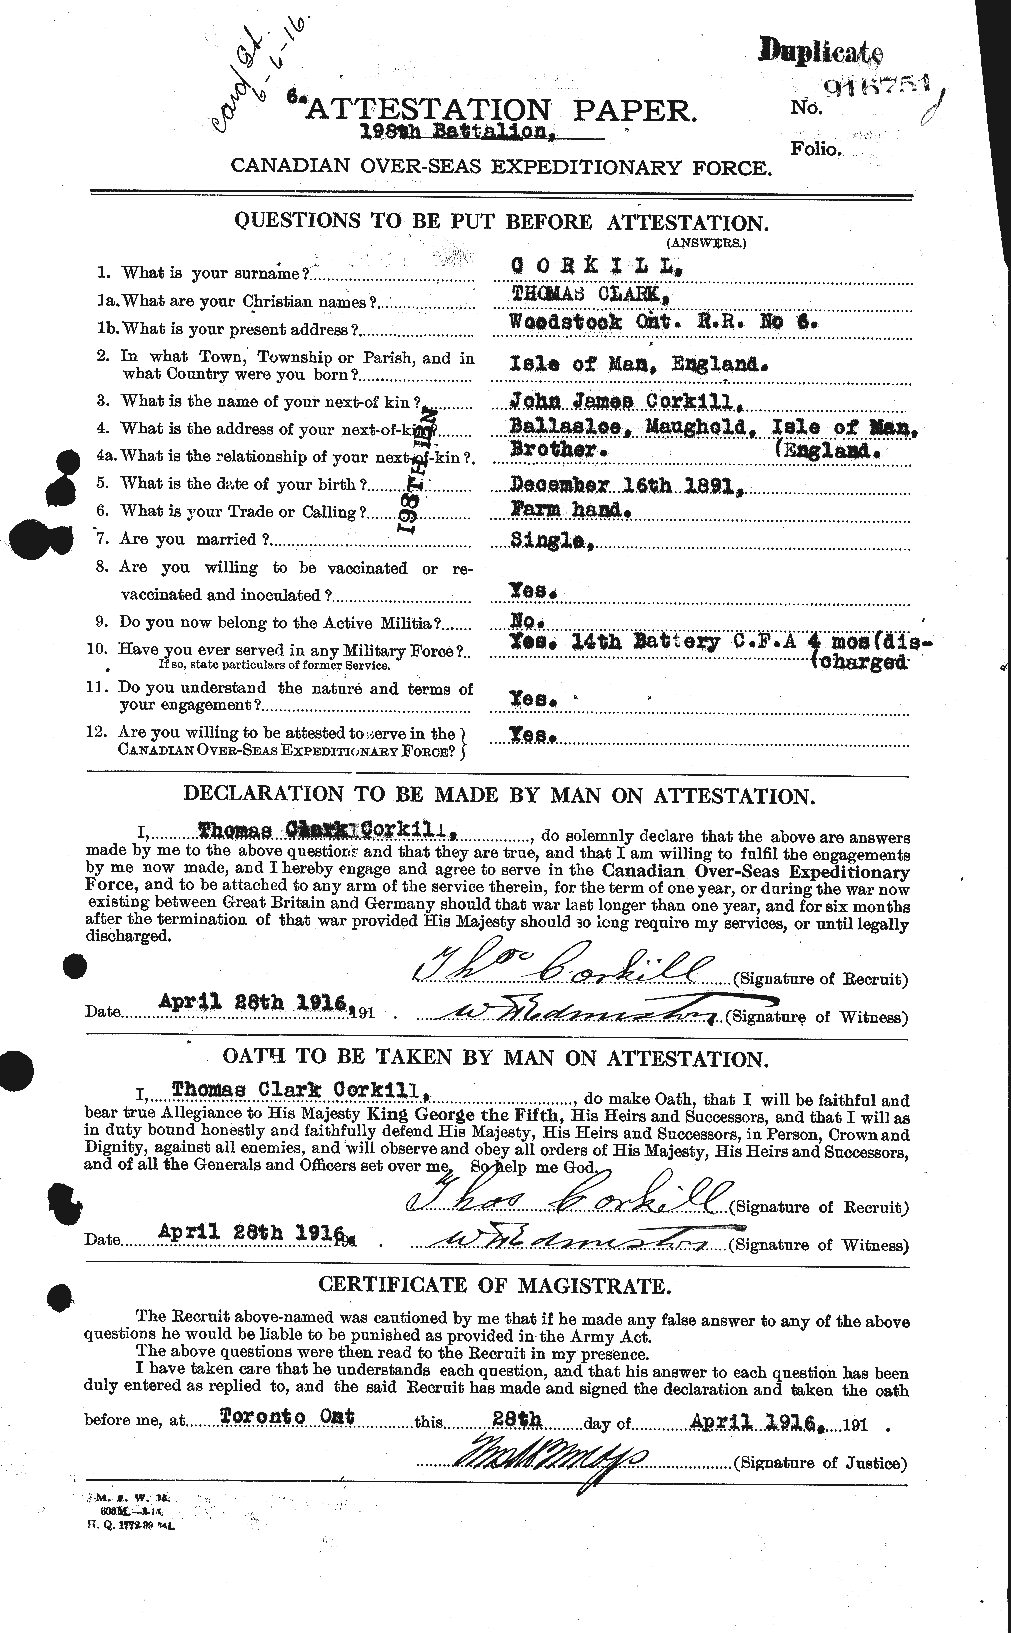 Personnel Records of the First World War - CEF 057633a